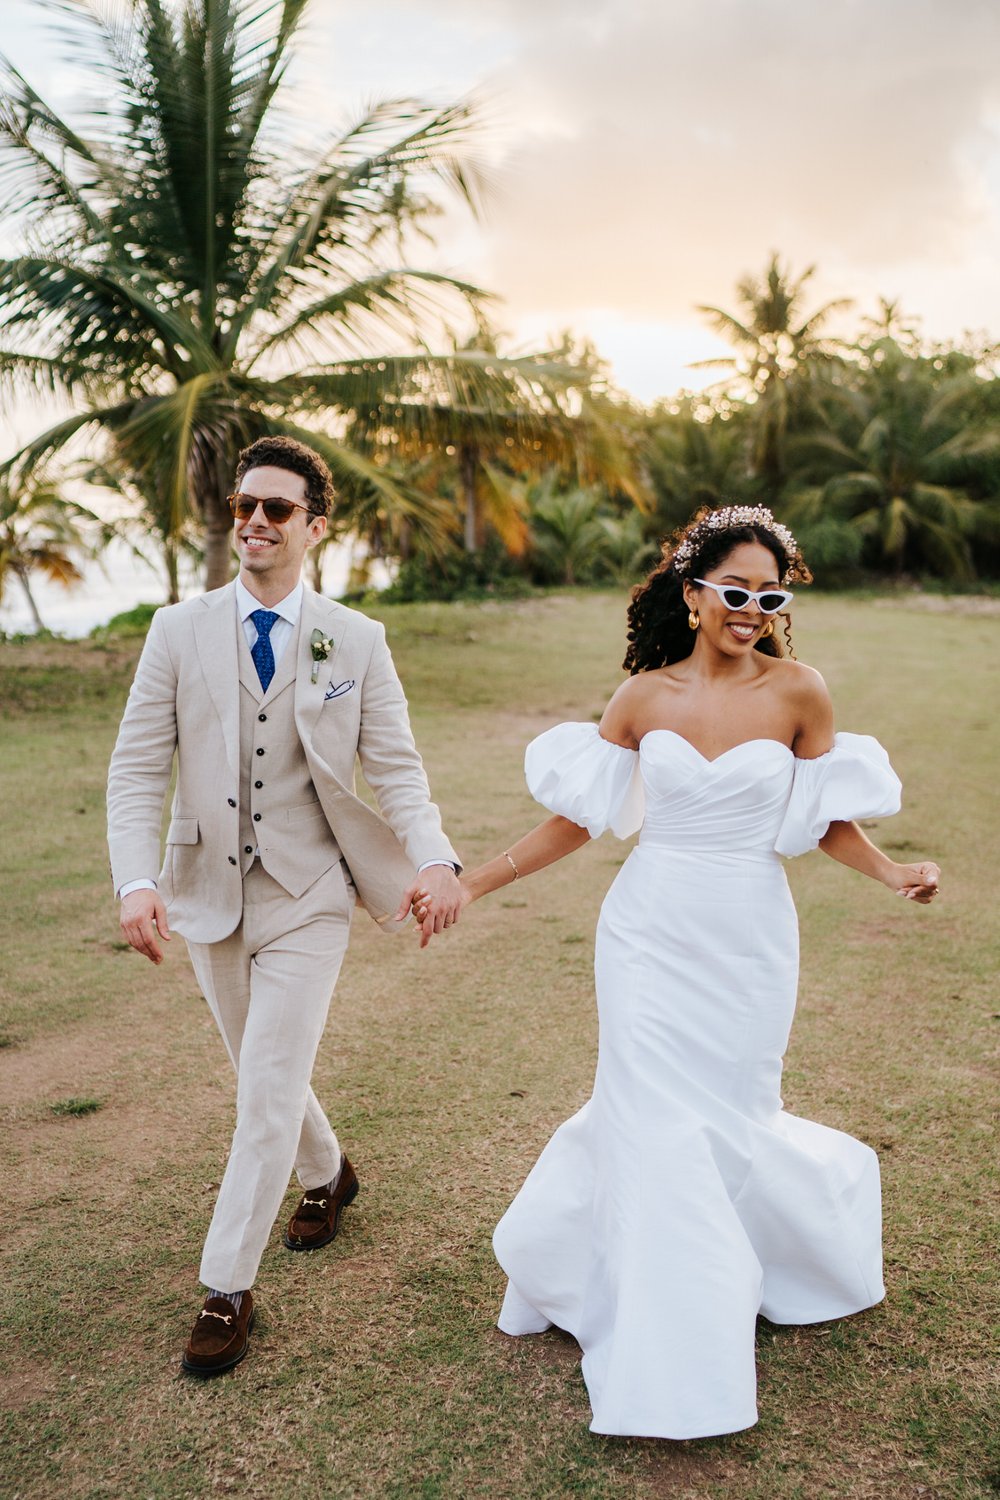 Bride and groom, wearing fashionable shades, strut towards camera in Puerto Rico beachfront wedding in Vieques